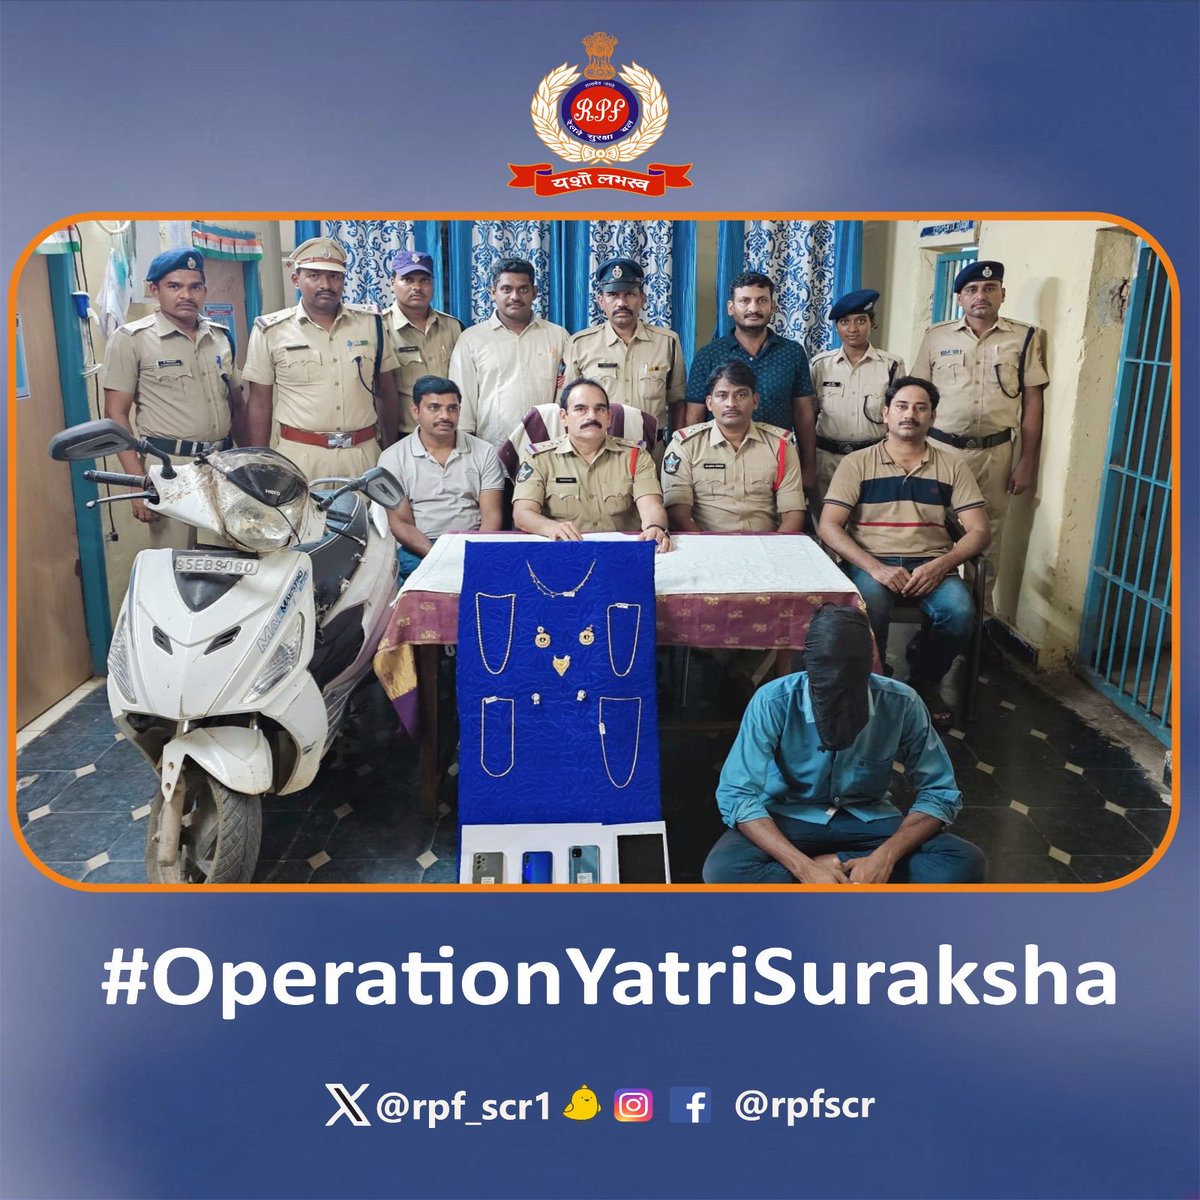 #RPF & #GRP #Tuni #Anakapalli along with detectives of #Rajahmundry caught a notorious offender involved in 4 theft cases with recovery of stolen property worth Rs.3.16 lakh. Our relentless efforts keep the passengers safe. #OperationYatriSuraksha ⁦@RPF_INDIA⁩ ⁦